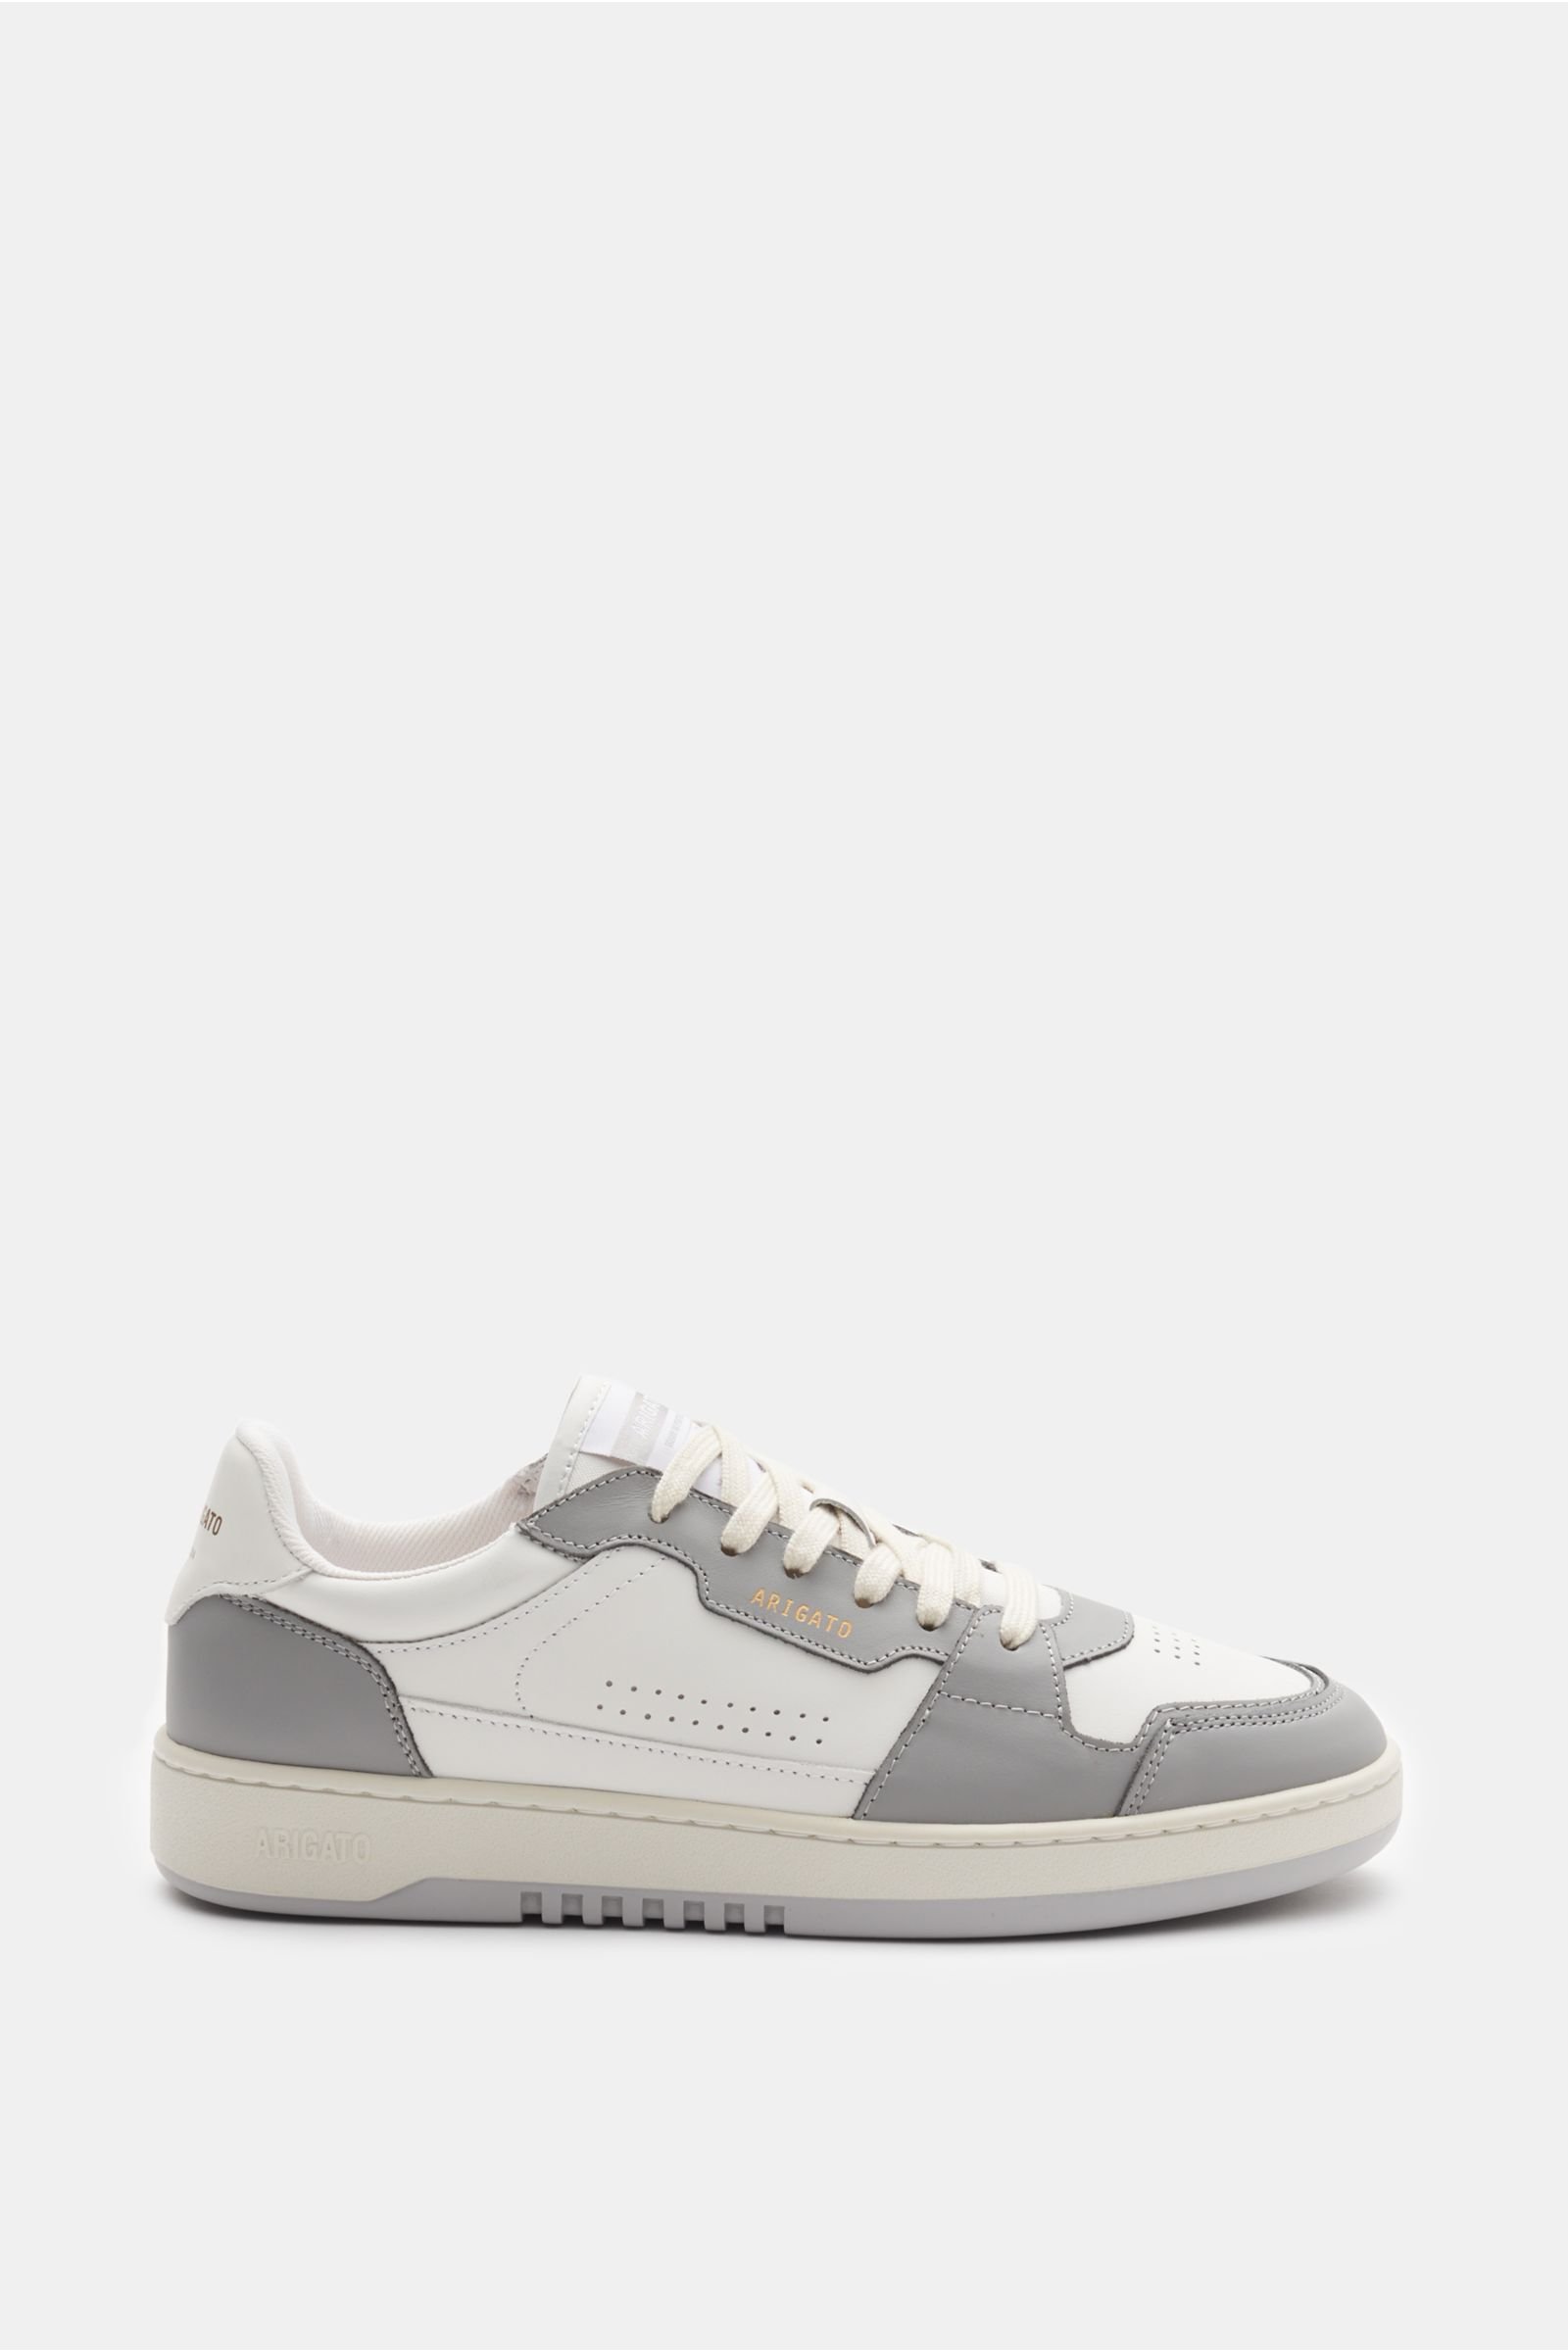 Sneakers 'Dice Lo' grey/white